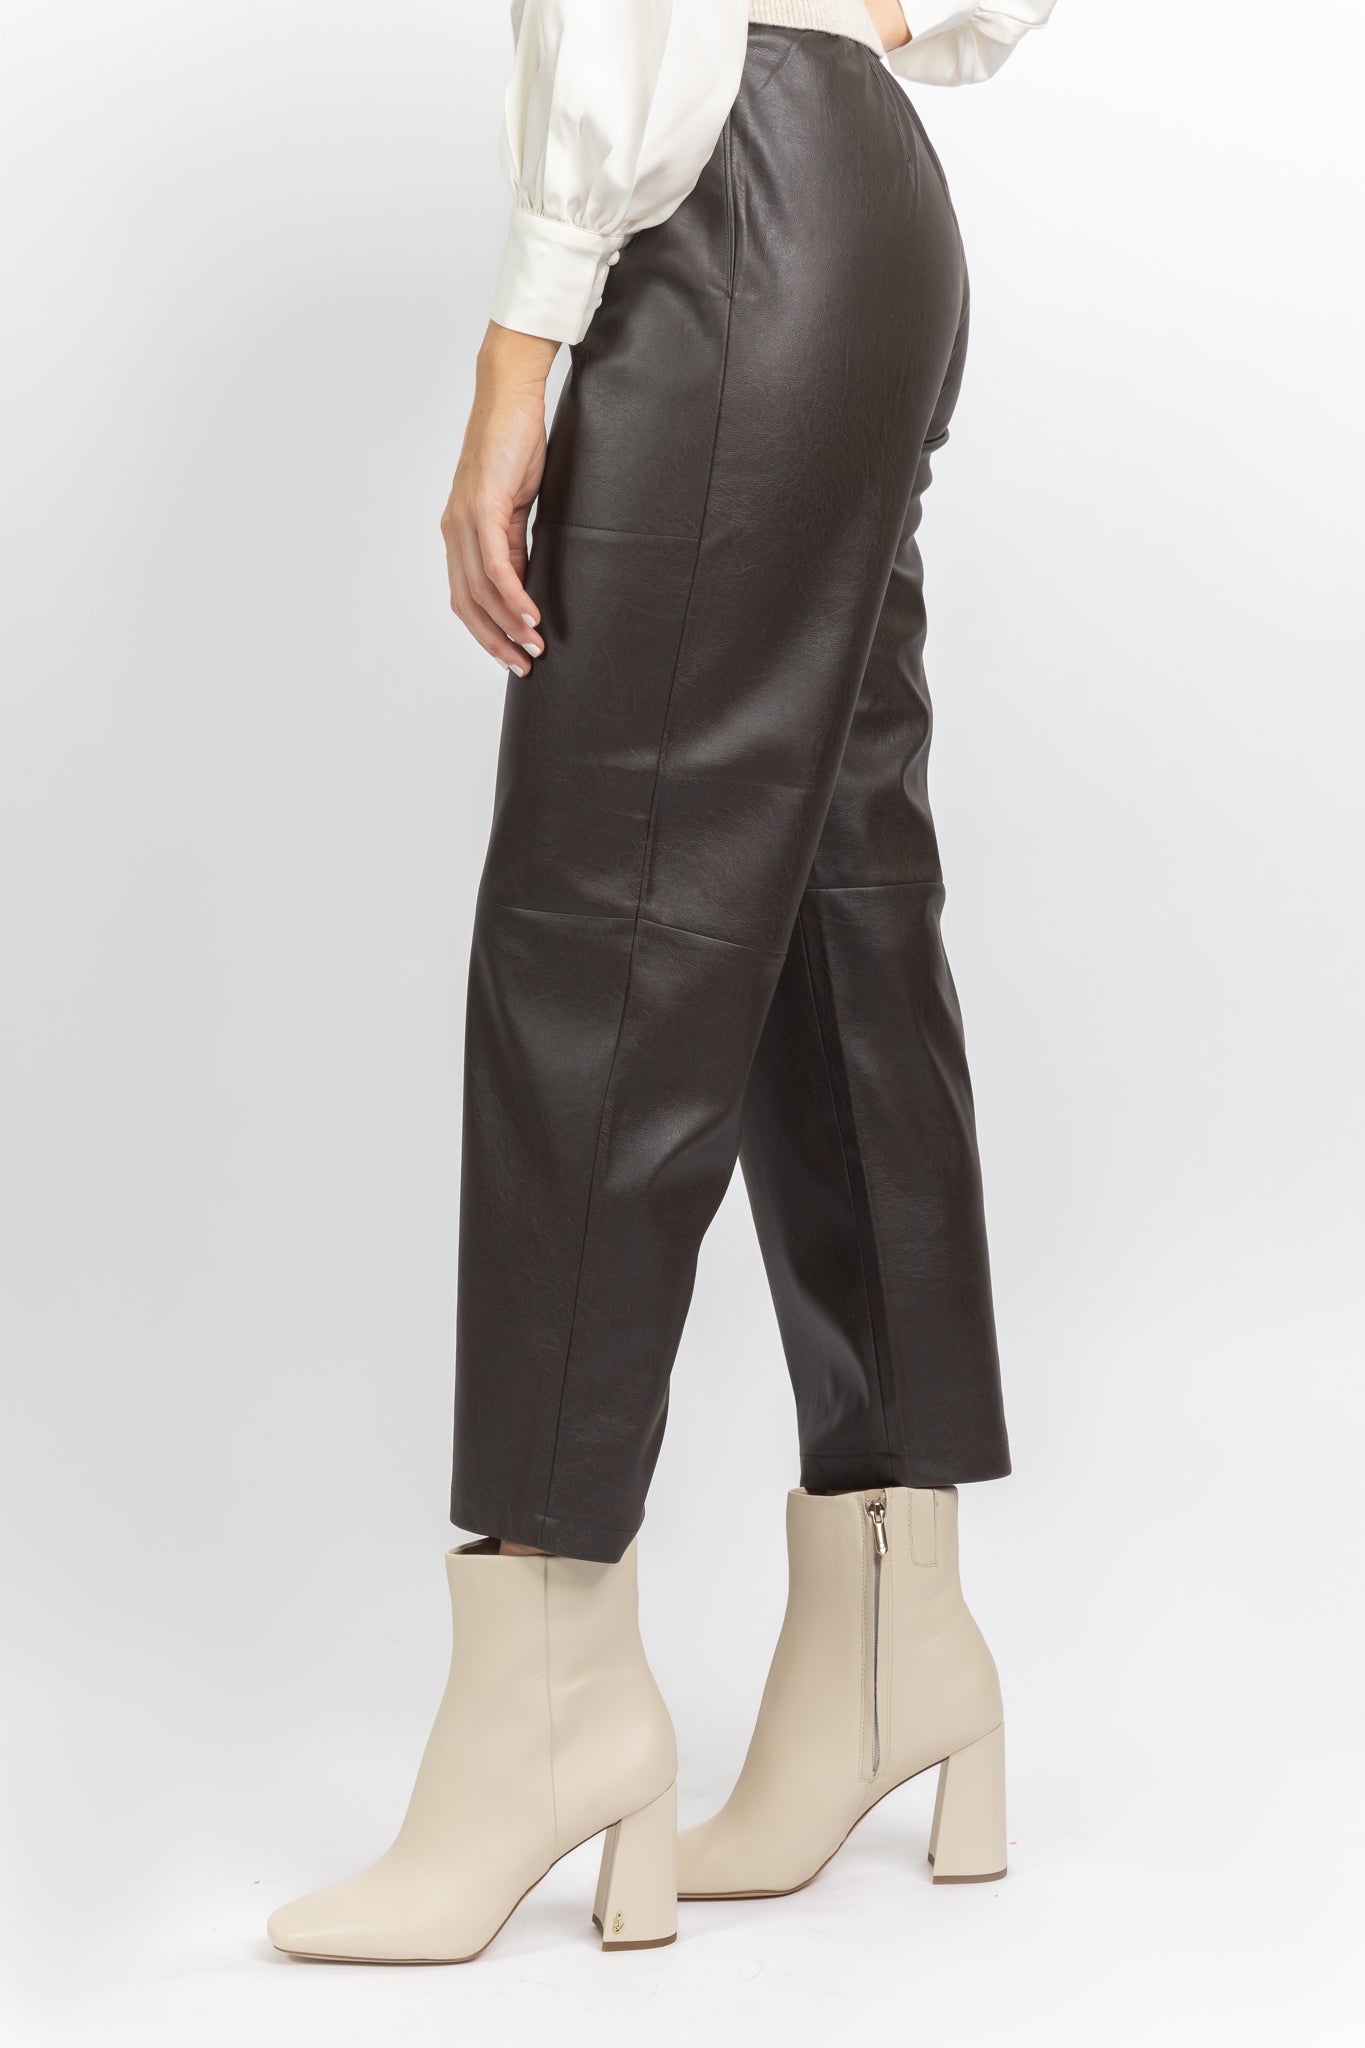 Topshop Tall faux leather skinny fit pants in black | ASOS